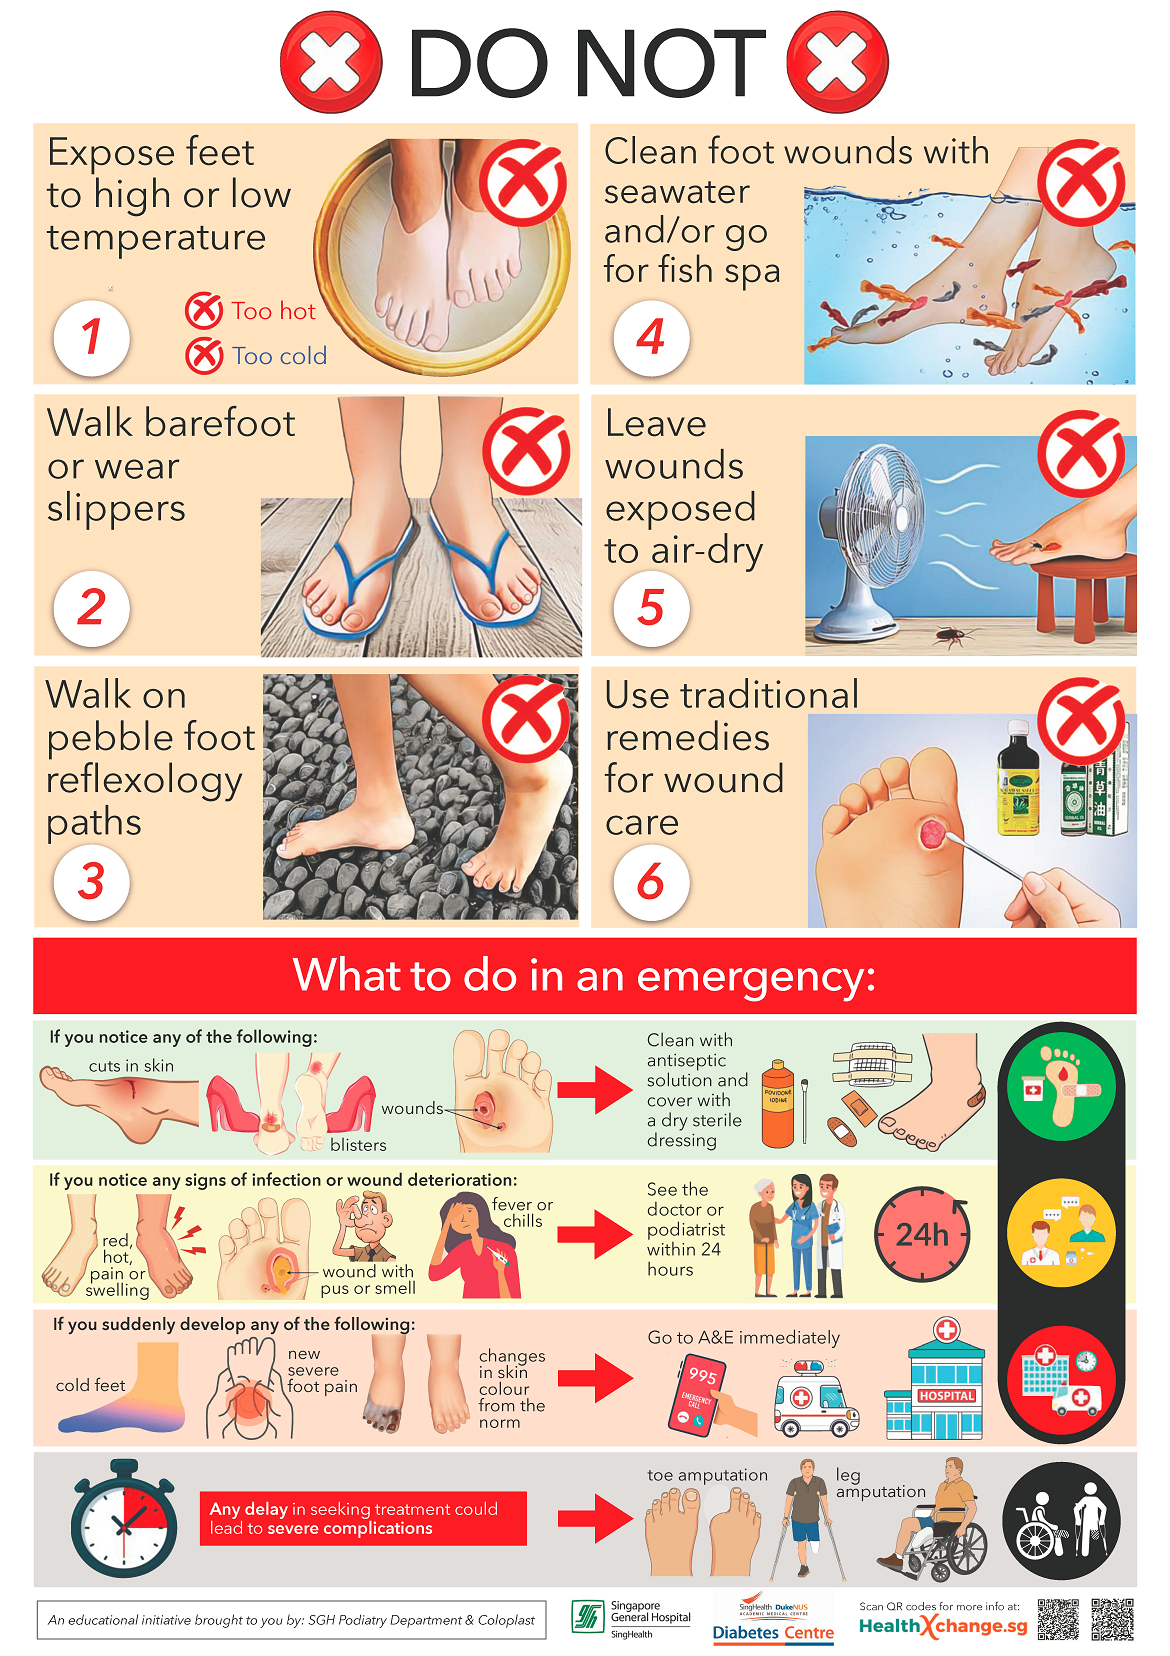 https://www.sgh.com.sg/patient-care/specialties-services/Podiatry/PublishingImages/WhattoavoidTheo-Infographic.png